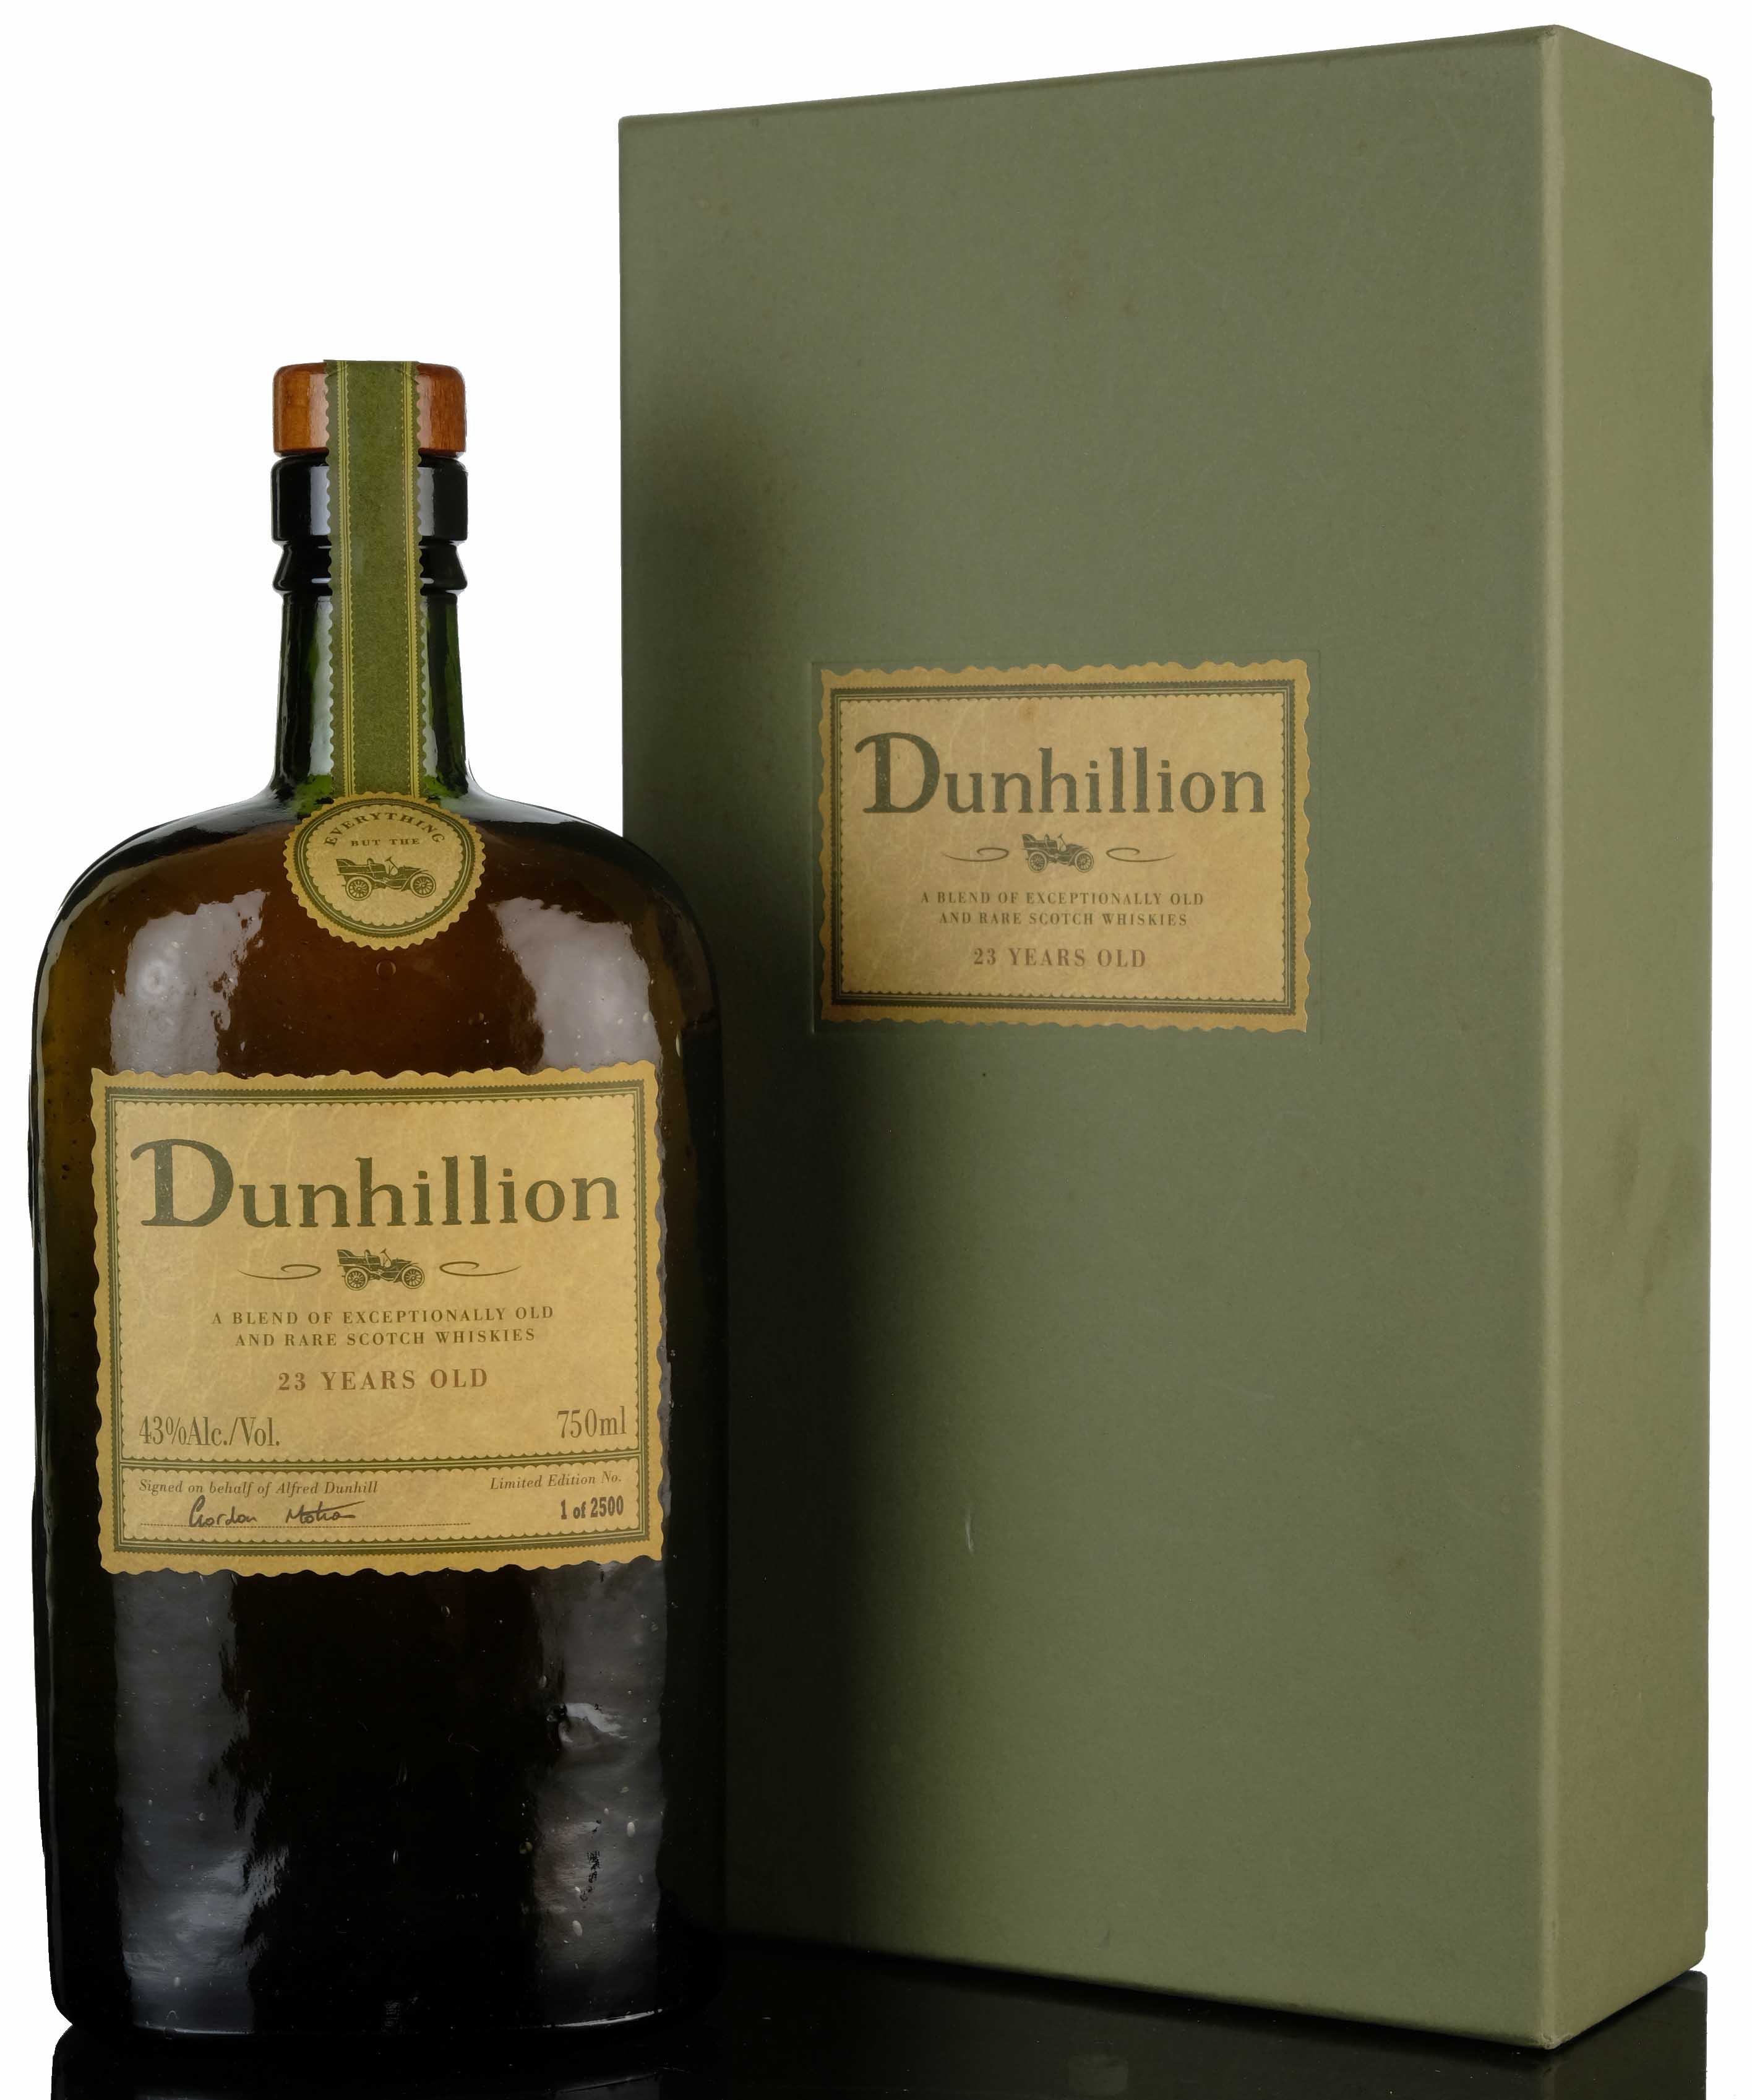 Dunhillion 23 Year Old